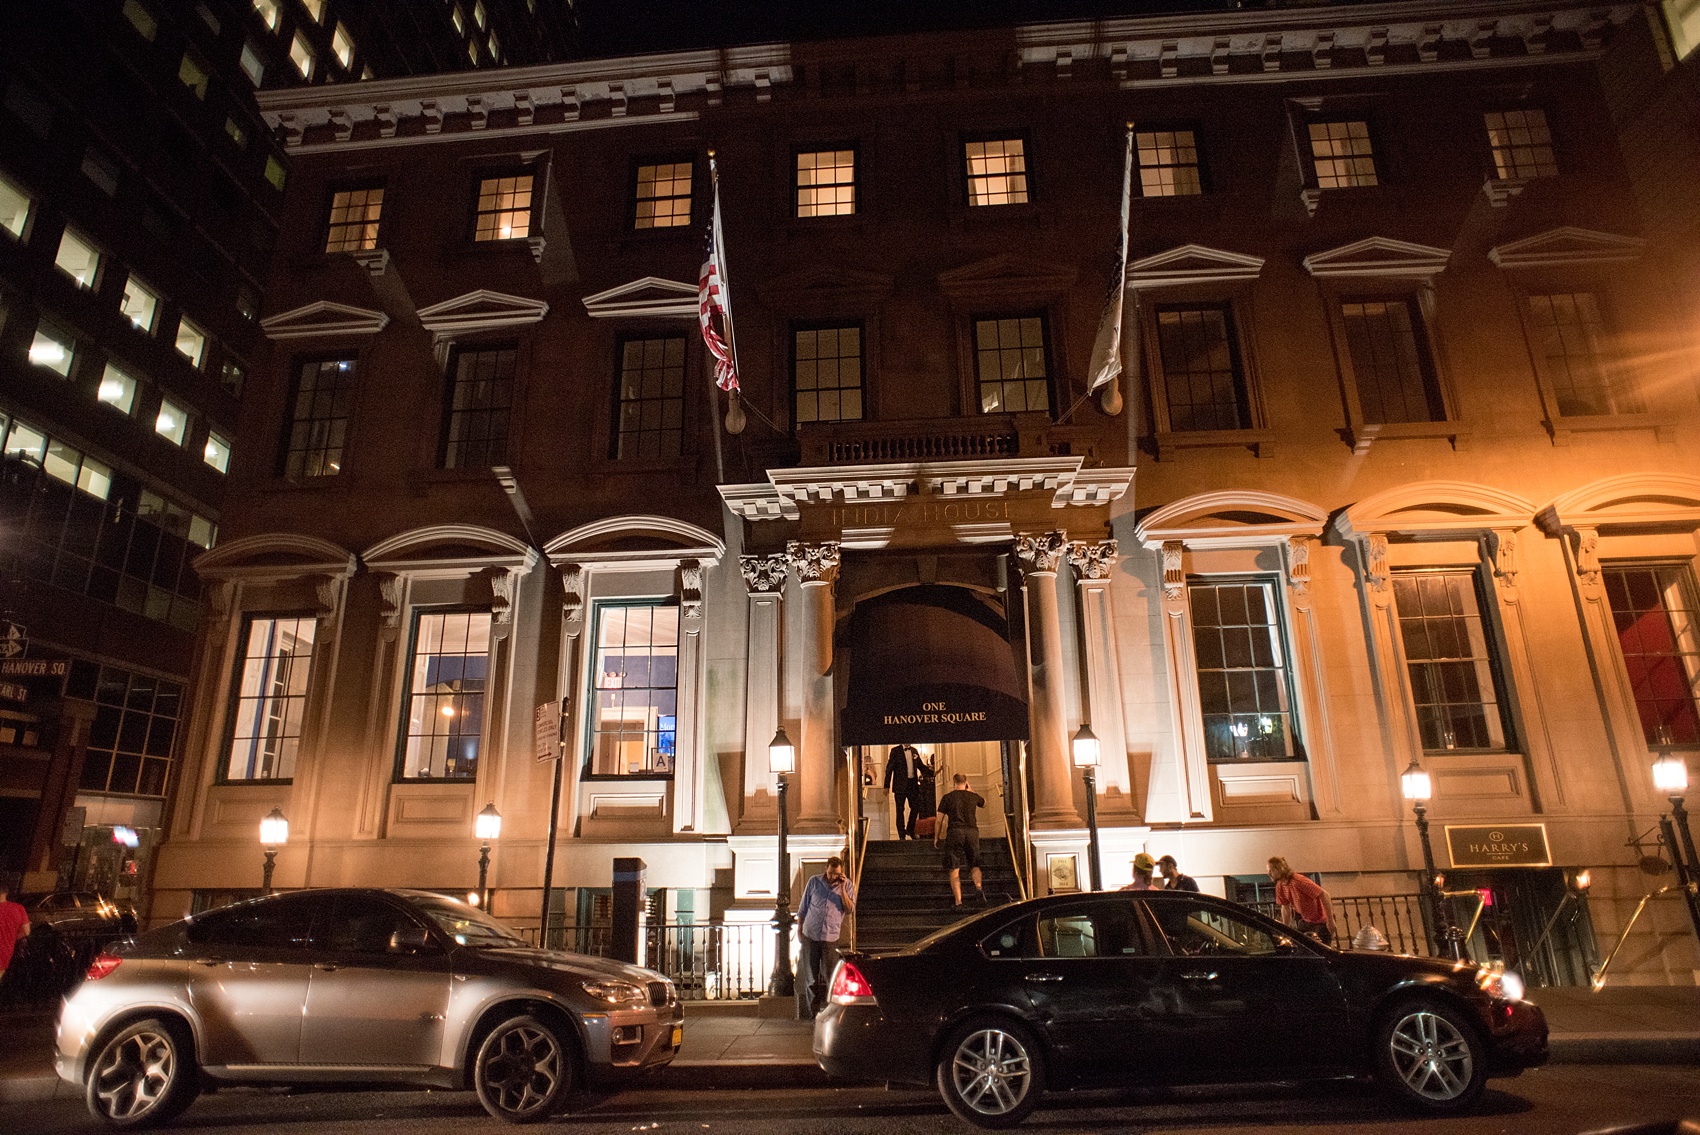 Mikkel Paige Photography photos of a luxury wedding in NYC. Night image of an India House reception in lower Manhattan.